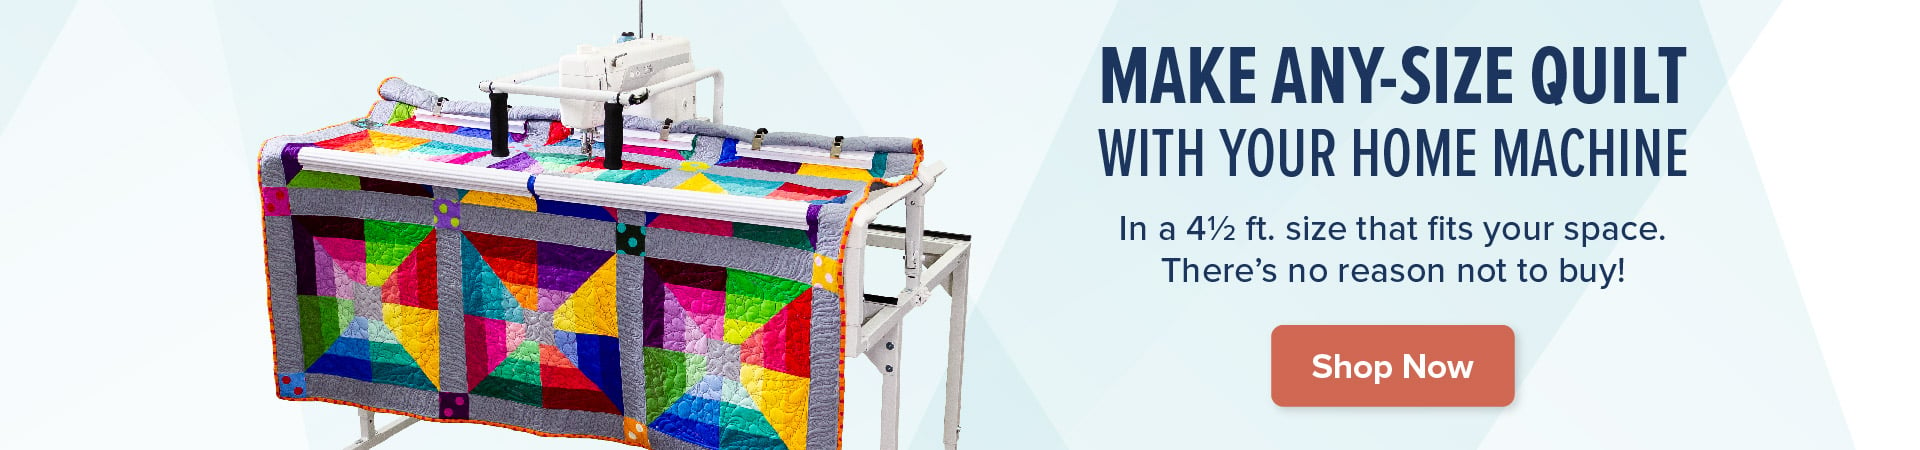 Make any-size quilt with your home machine. Shop now